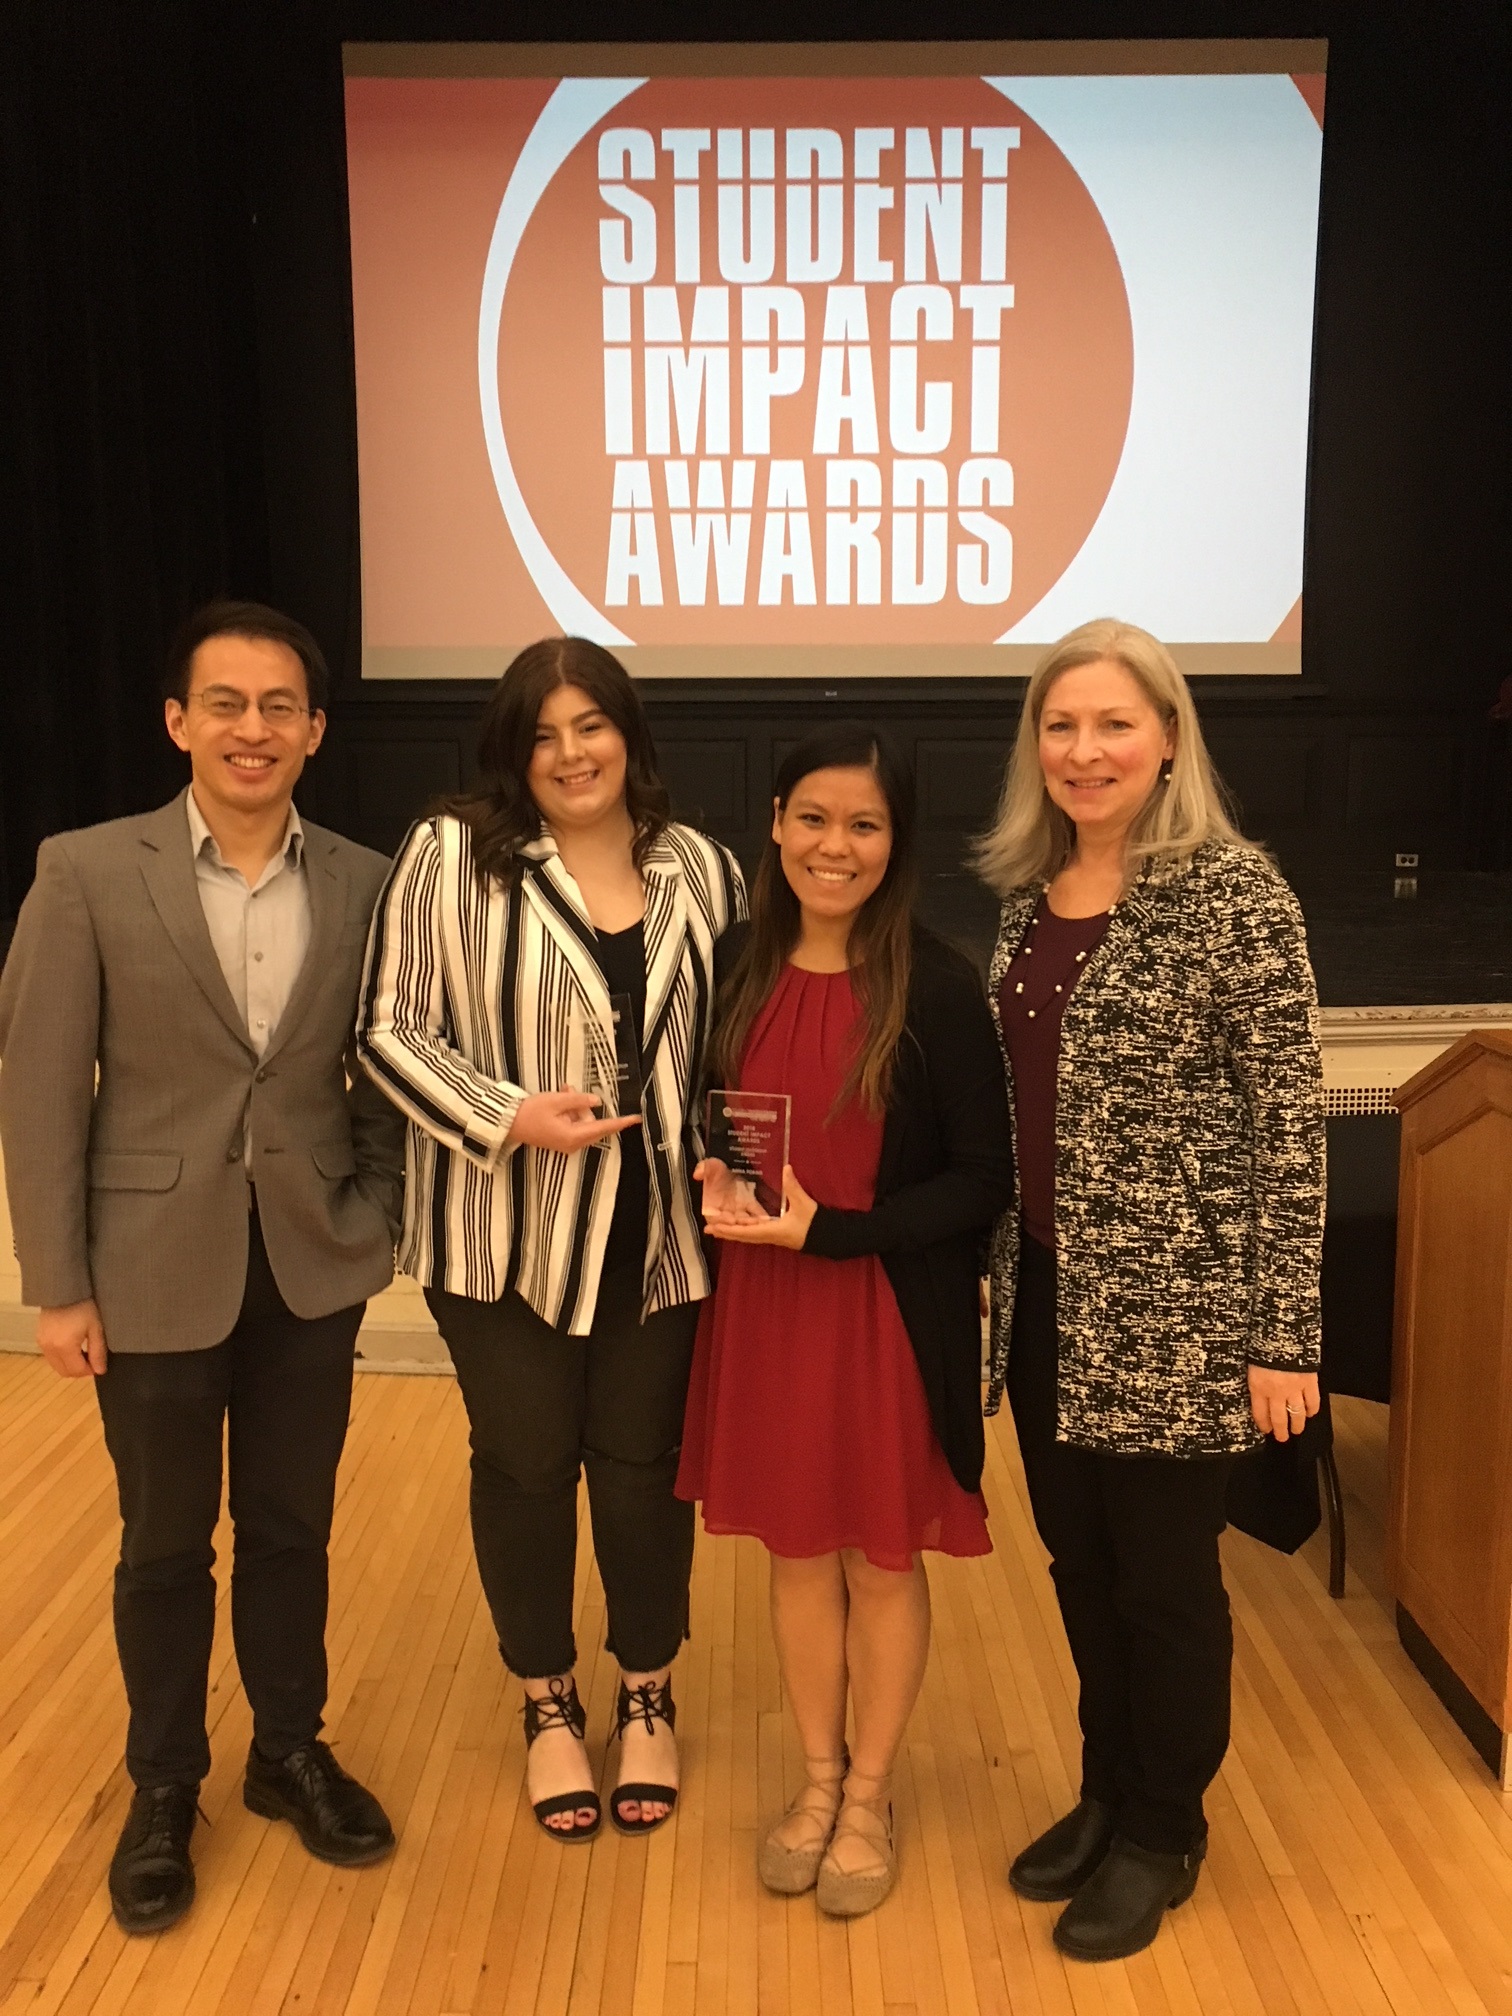 (from left) PRSSA faculty co-advisor Prof. Bryan Wang, PRSSA 2018 Vice President for Chapter Advancement Brianna Frisbie, PRSSA 2017 Chapter President Anna Fobair, and PRSSA faculty co-adviser Prof. Phyllis Larsen